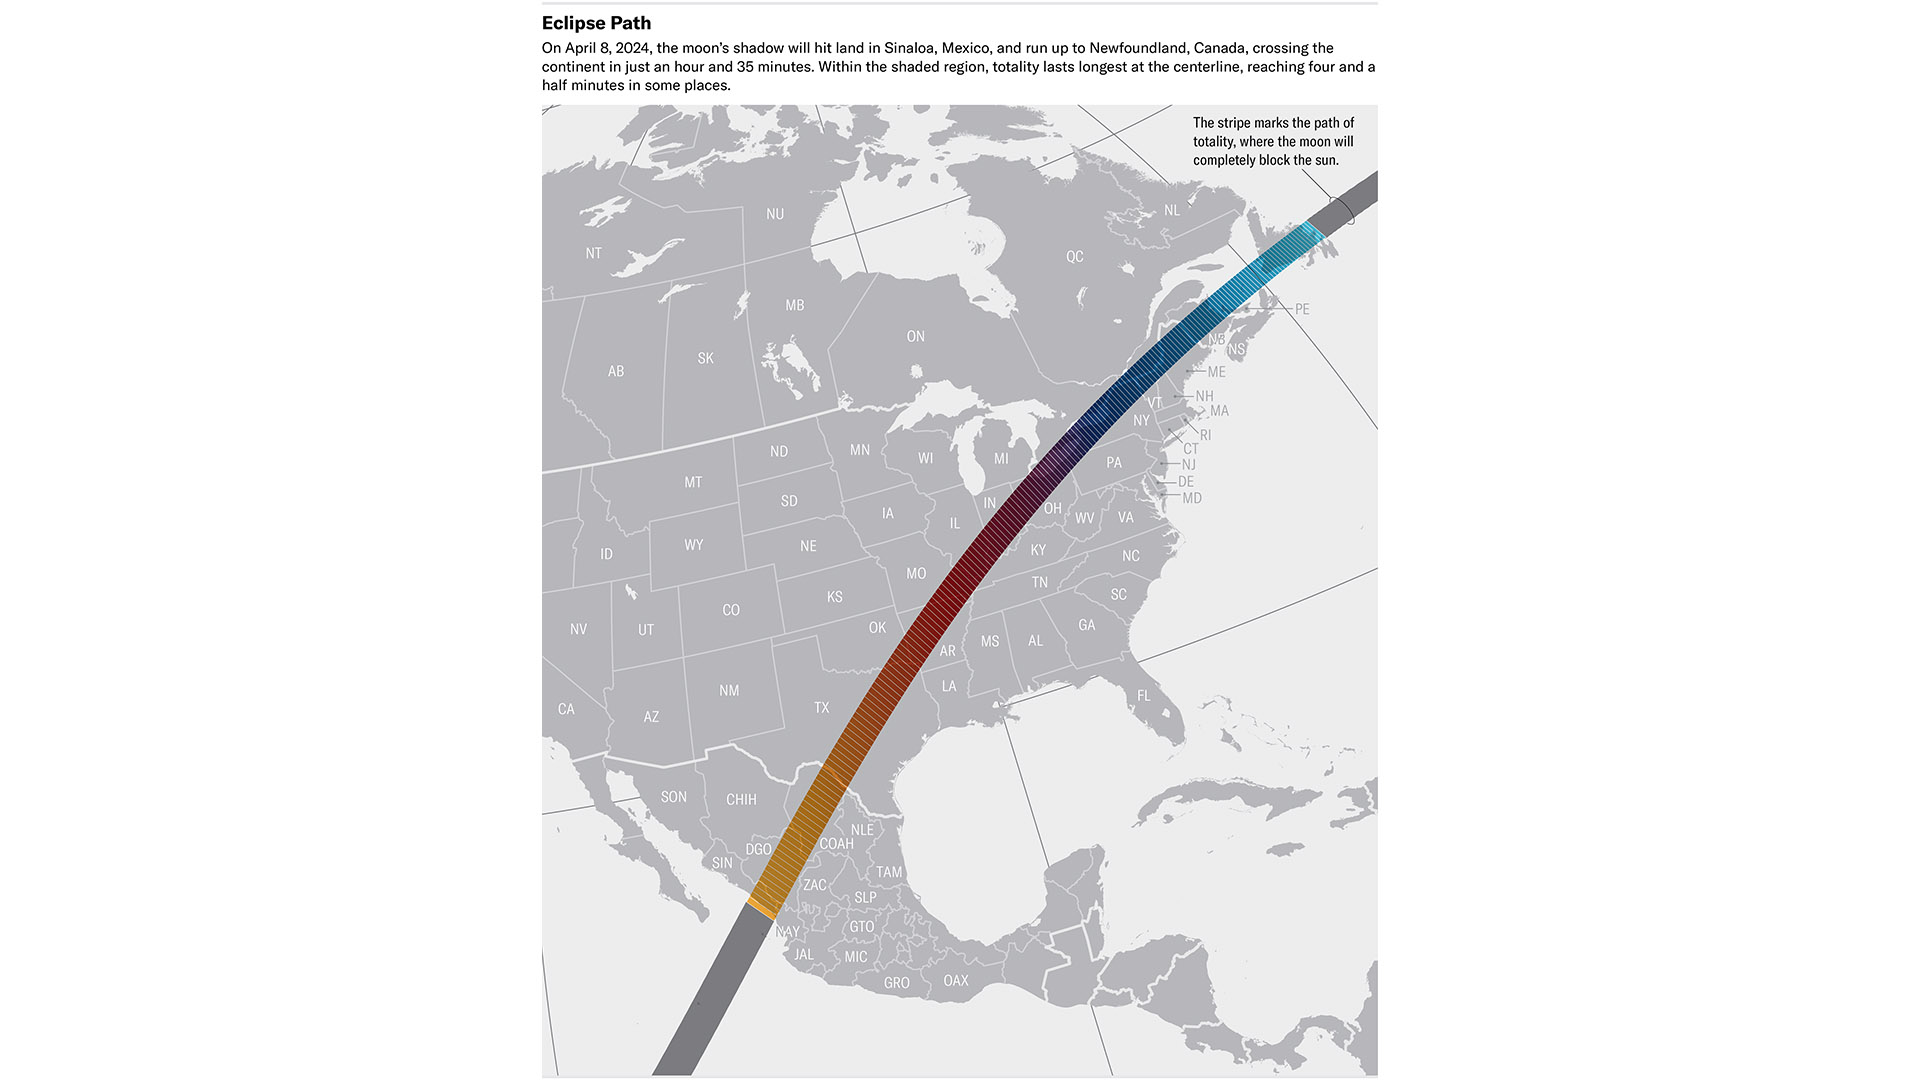 graphic showing the path of totality of the April 8 solar eclipse crossing from mexico up to northeast canada